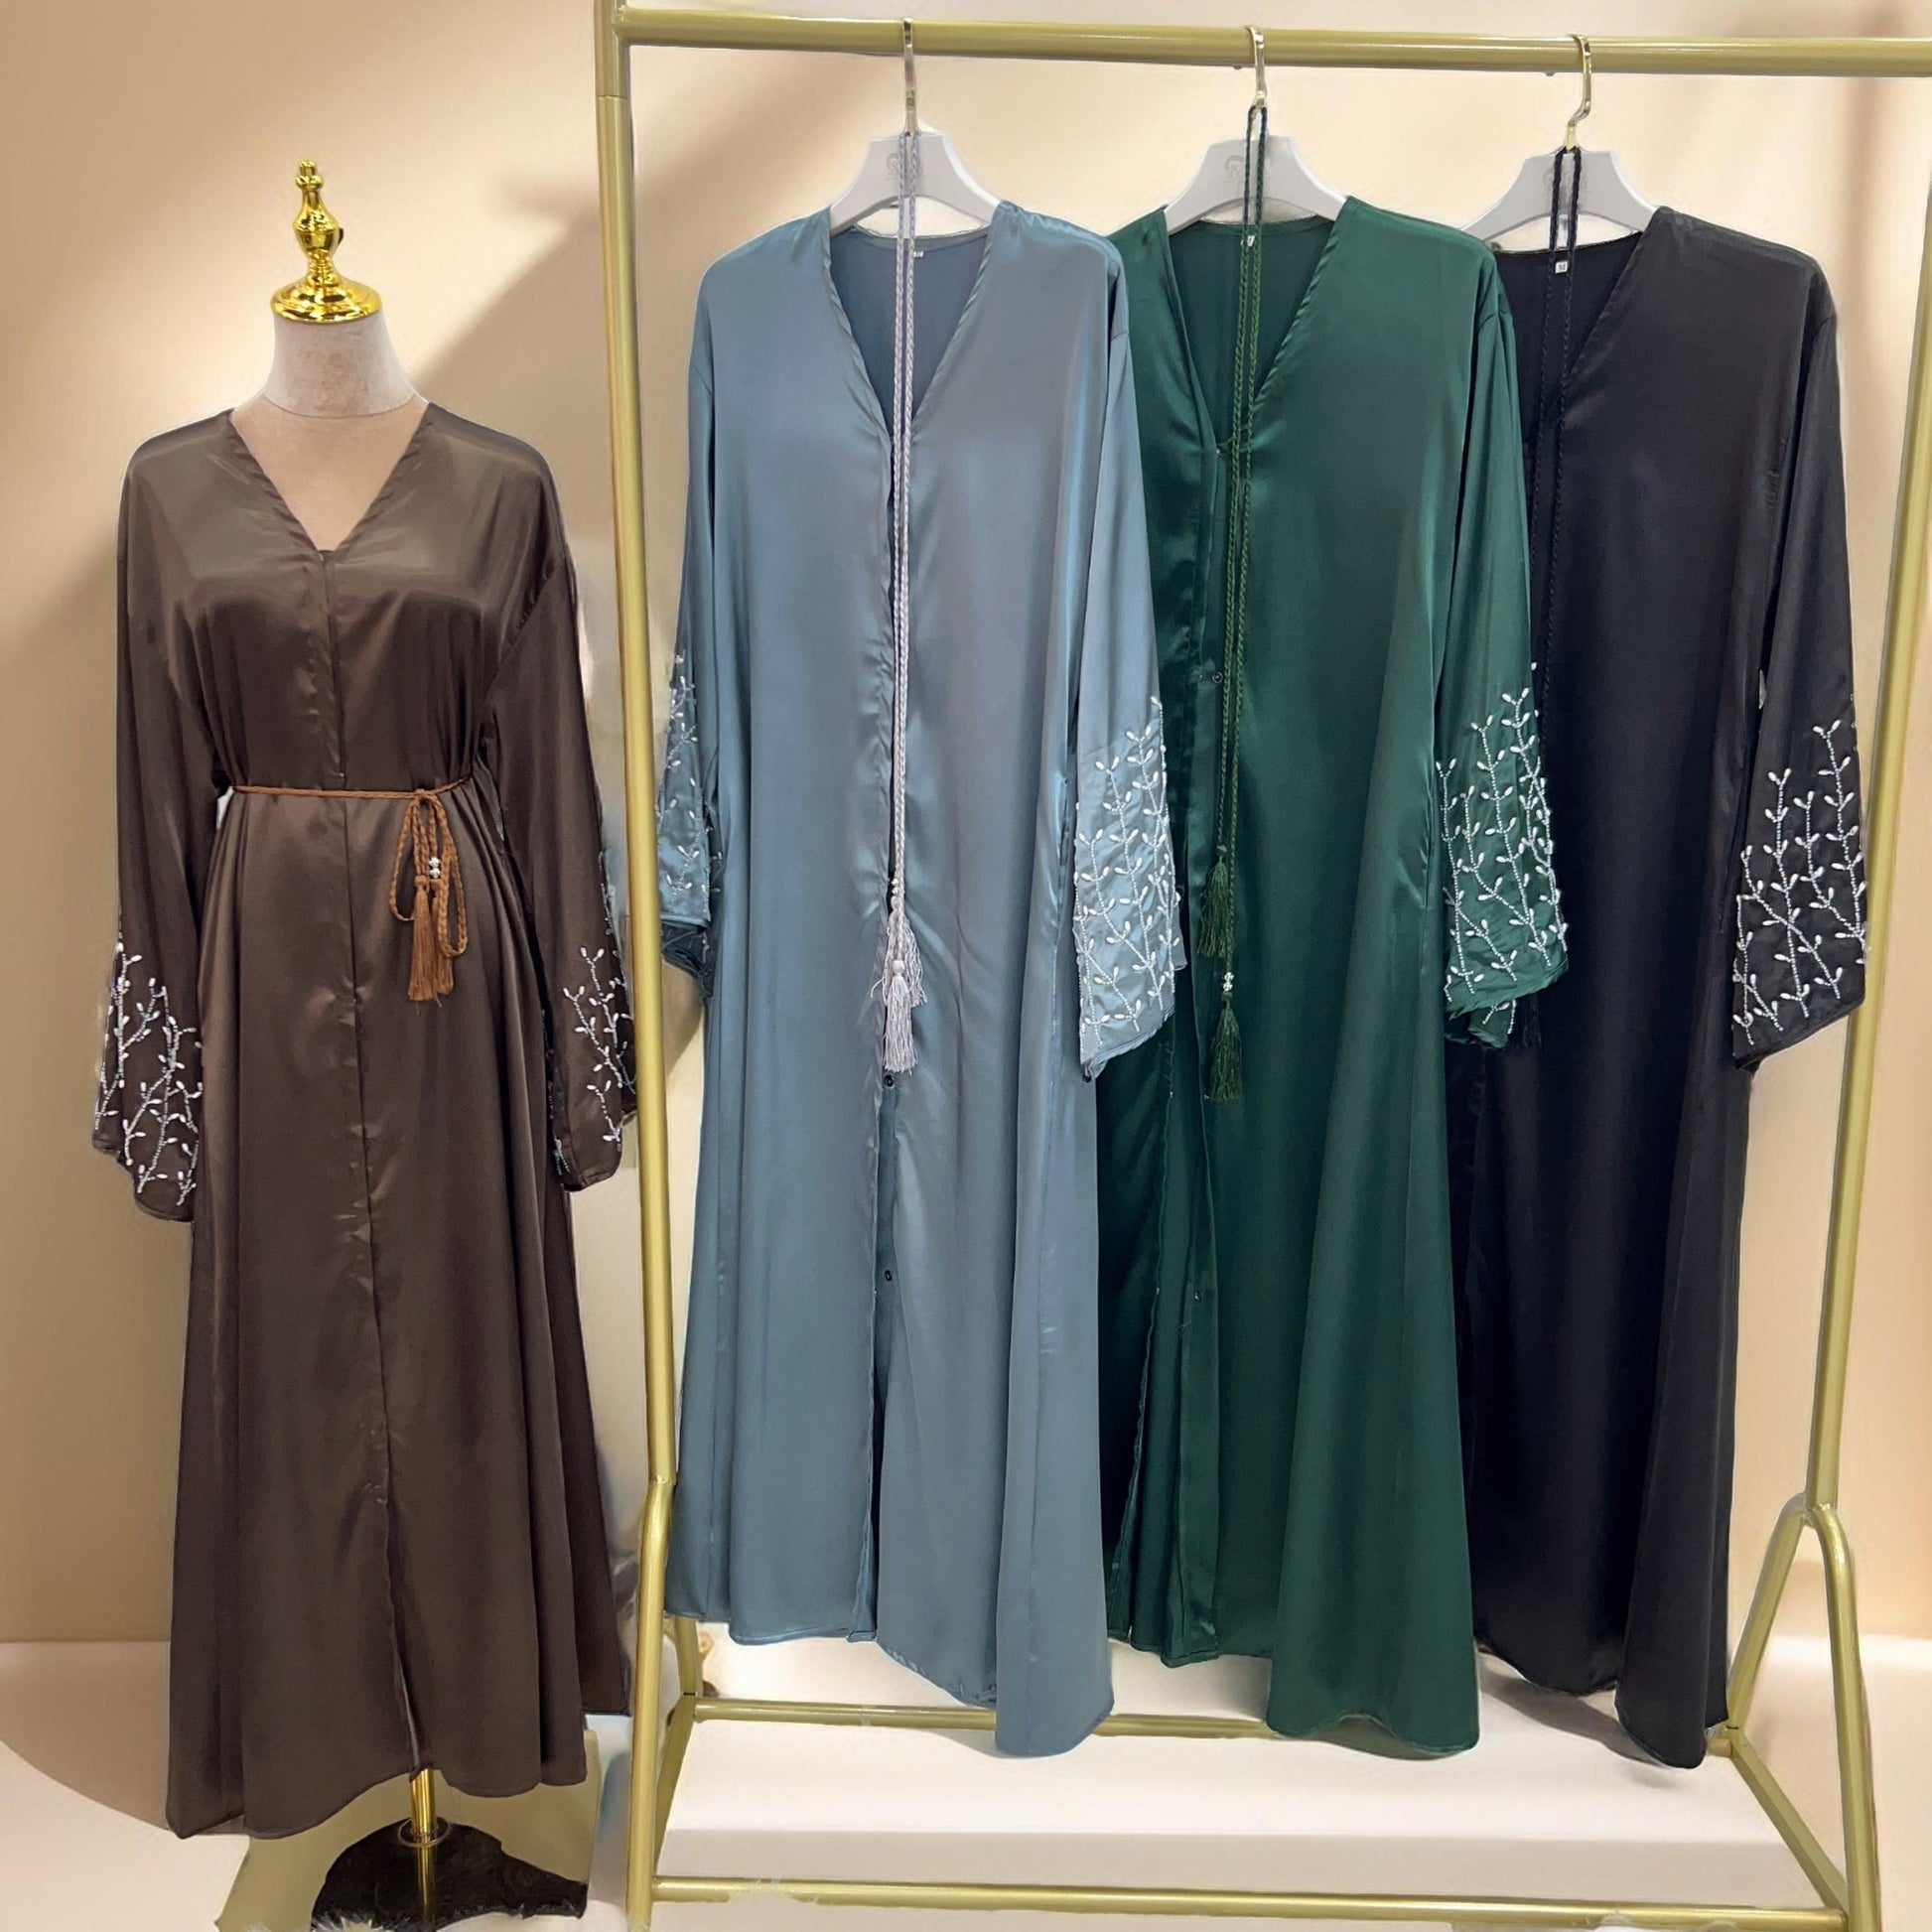 Lulua Satin Luxe Abaya with Handcrafted Pearls - Try Modest Limited 